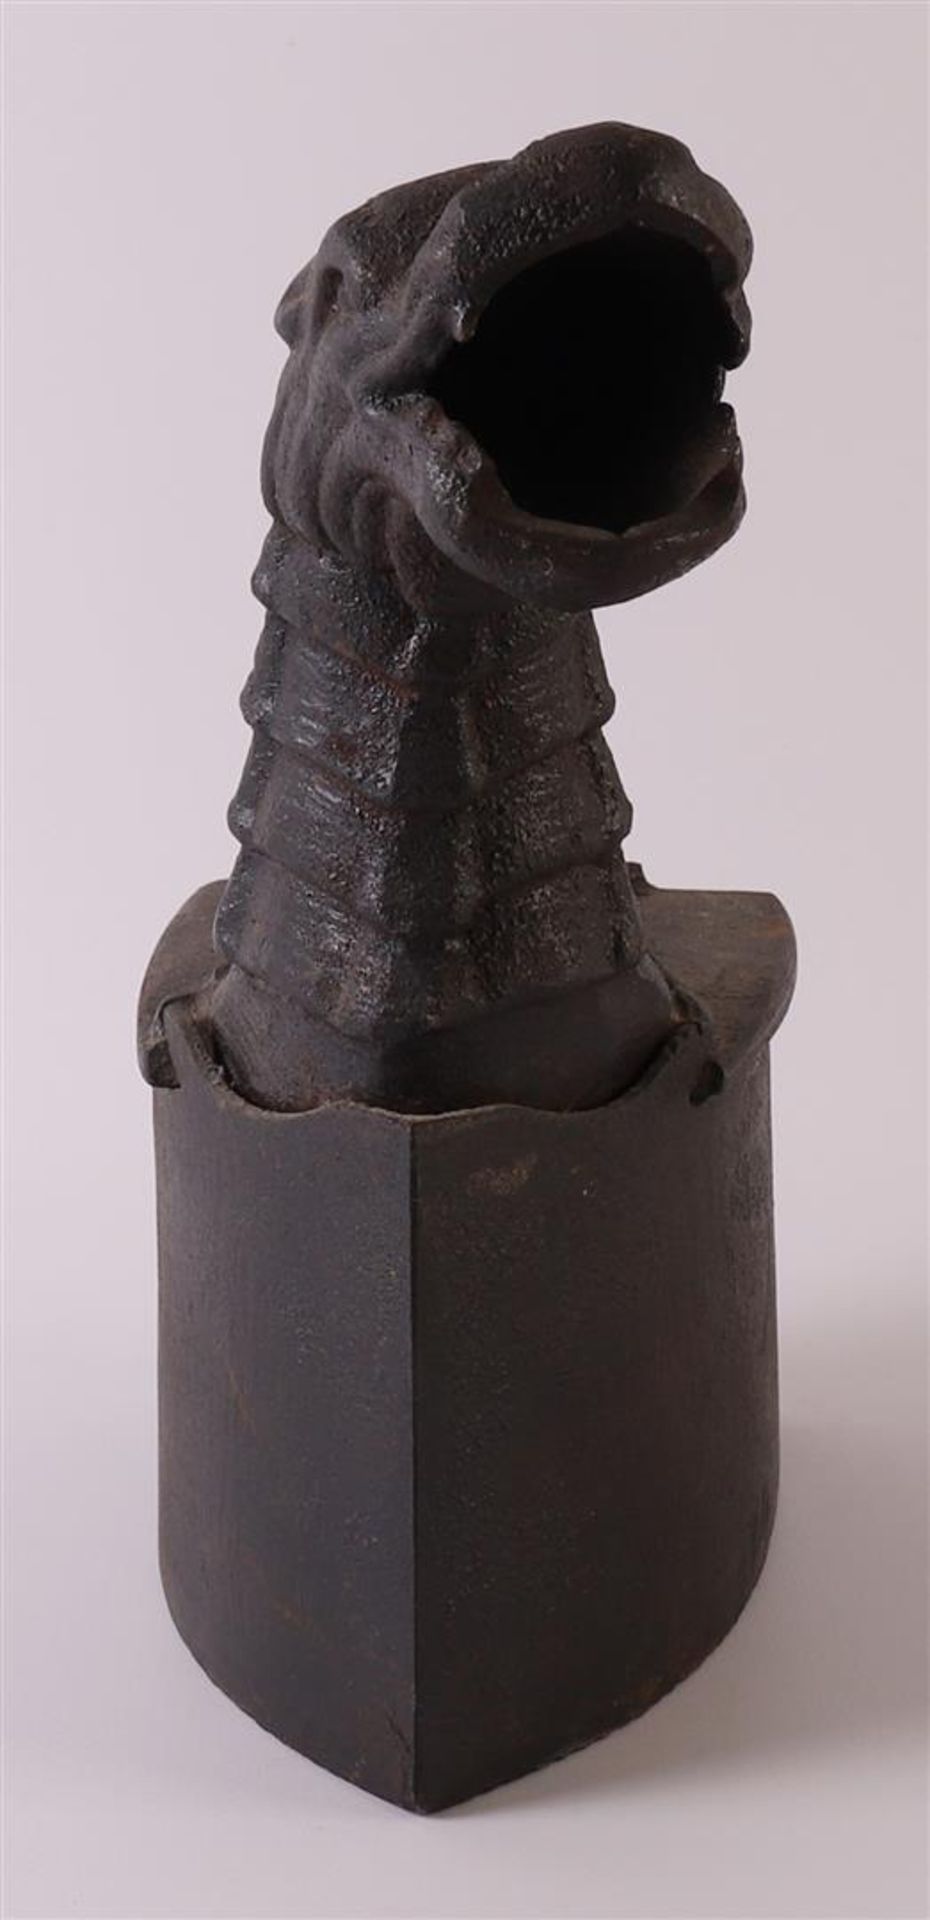 A bronze pan on tripod, 18th century, h 10 x Ø 24 cm (without stem). Here is a cast iron coal - Image 5 of 7